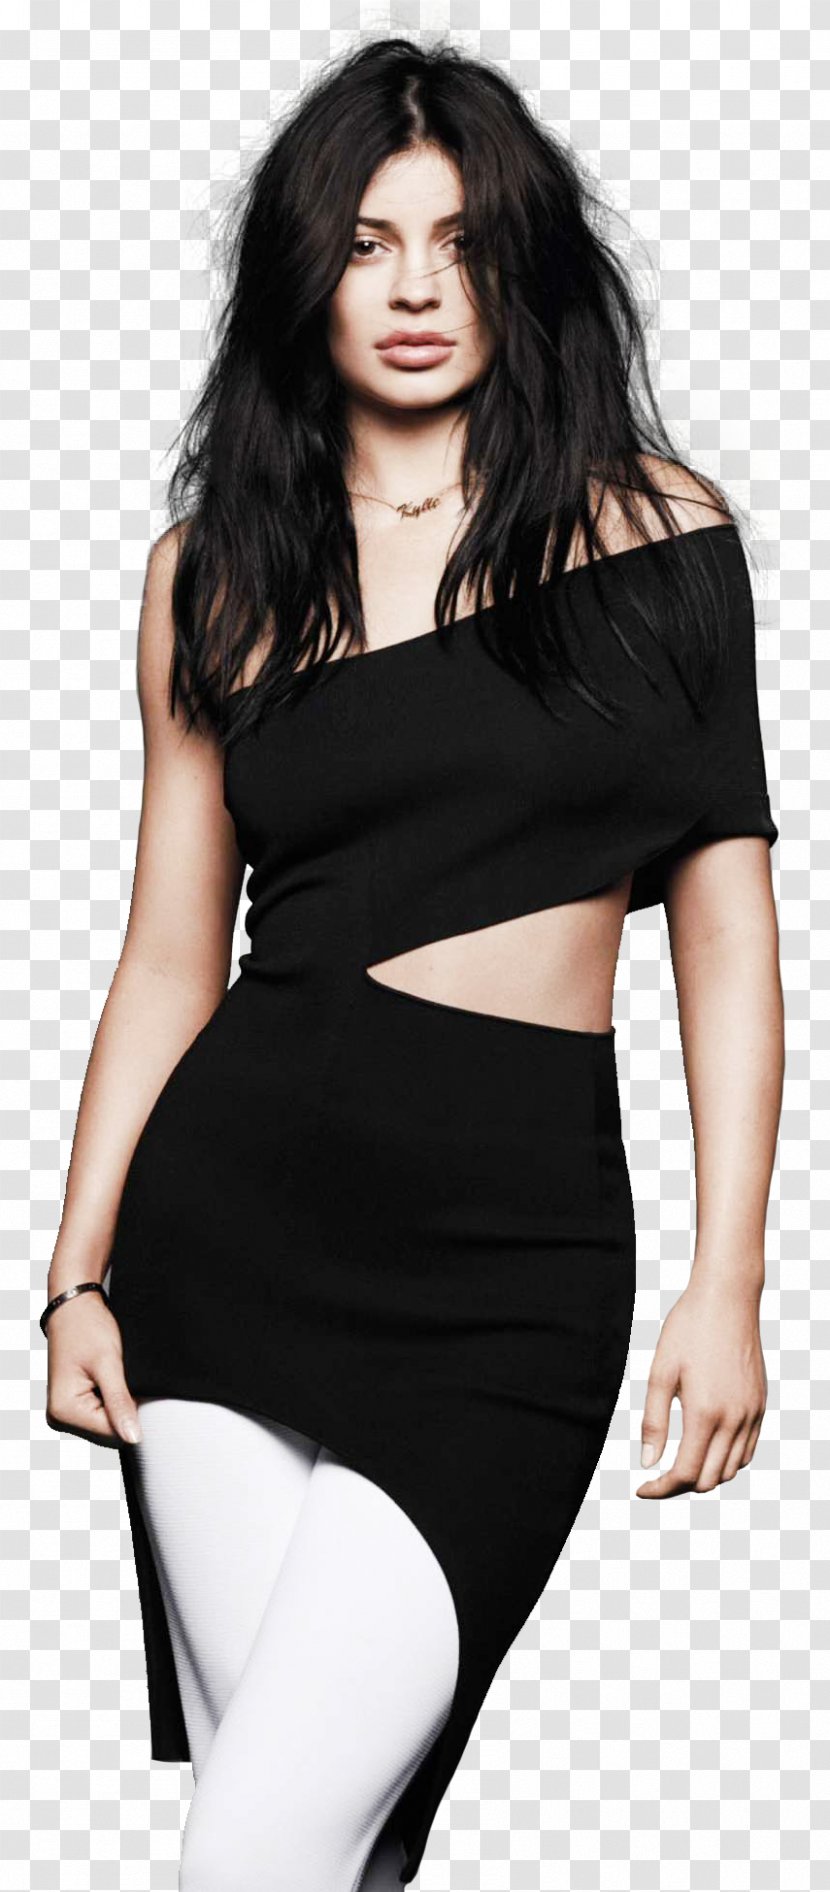 Kylie Jenner Keeping Up With The Kardashians T-shirt Fashion Female - Cartoon Transparent PNG